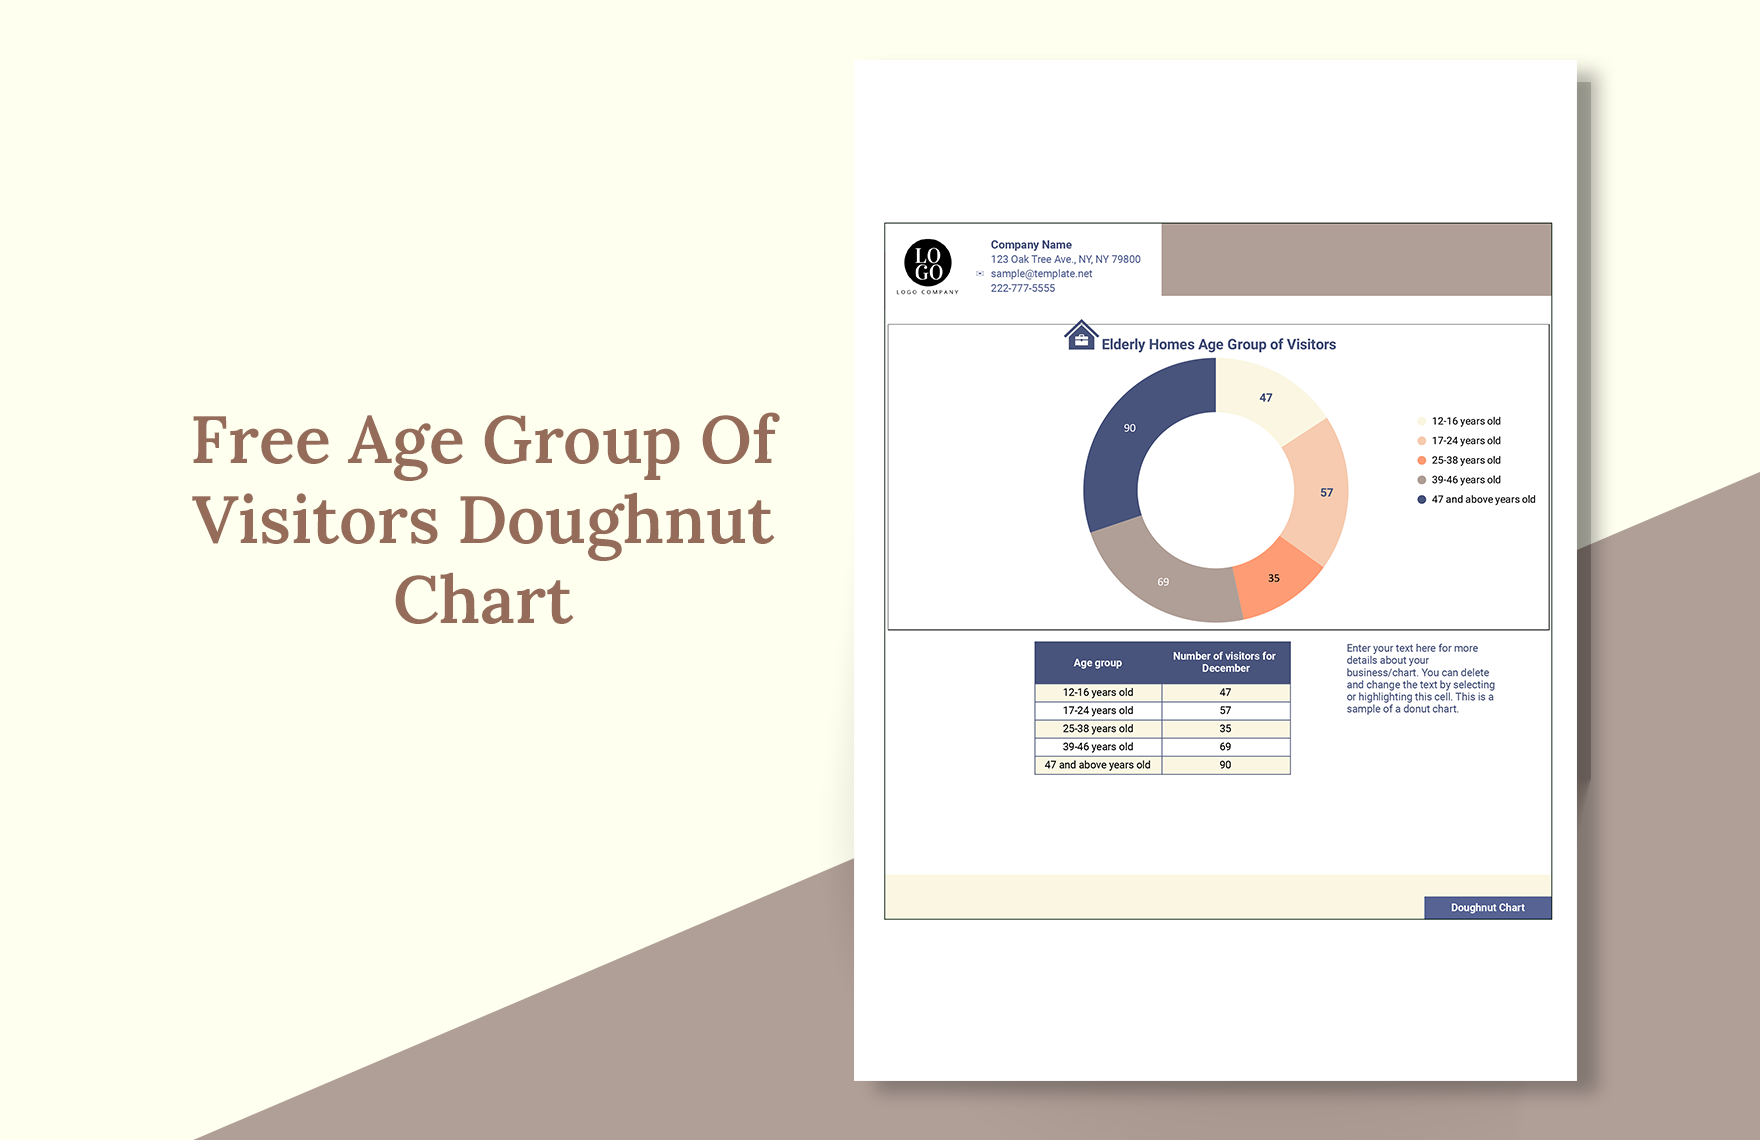 Free Age Group Of Visitors Doughnut Chart